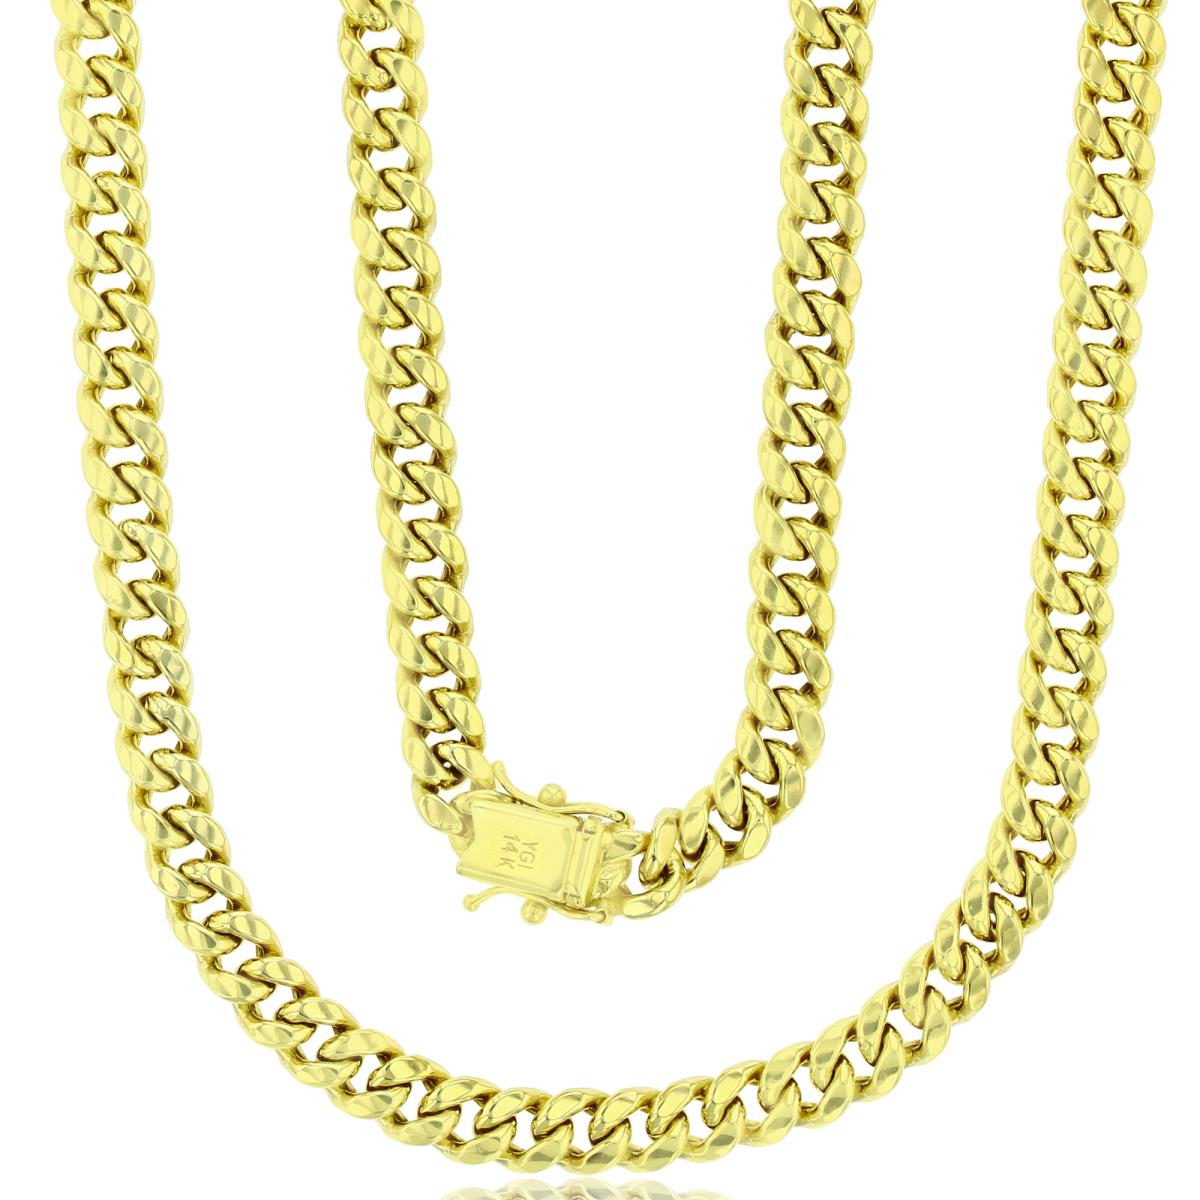 10K Yellow Gold 6.60mm 24" Hollow Miami Cuban 180 Chain with Box Lock